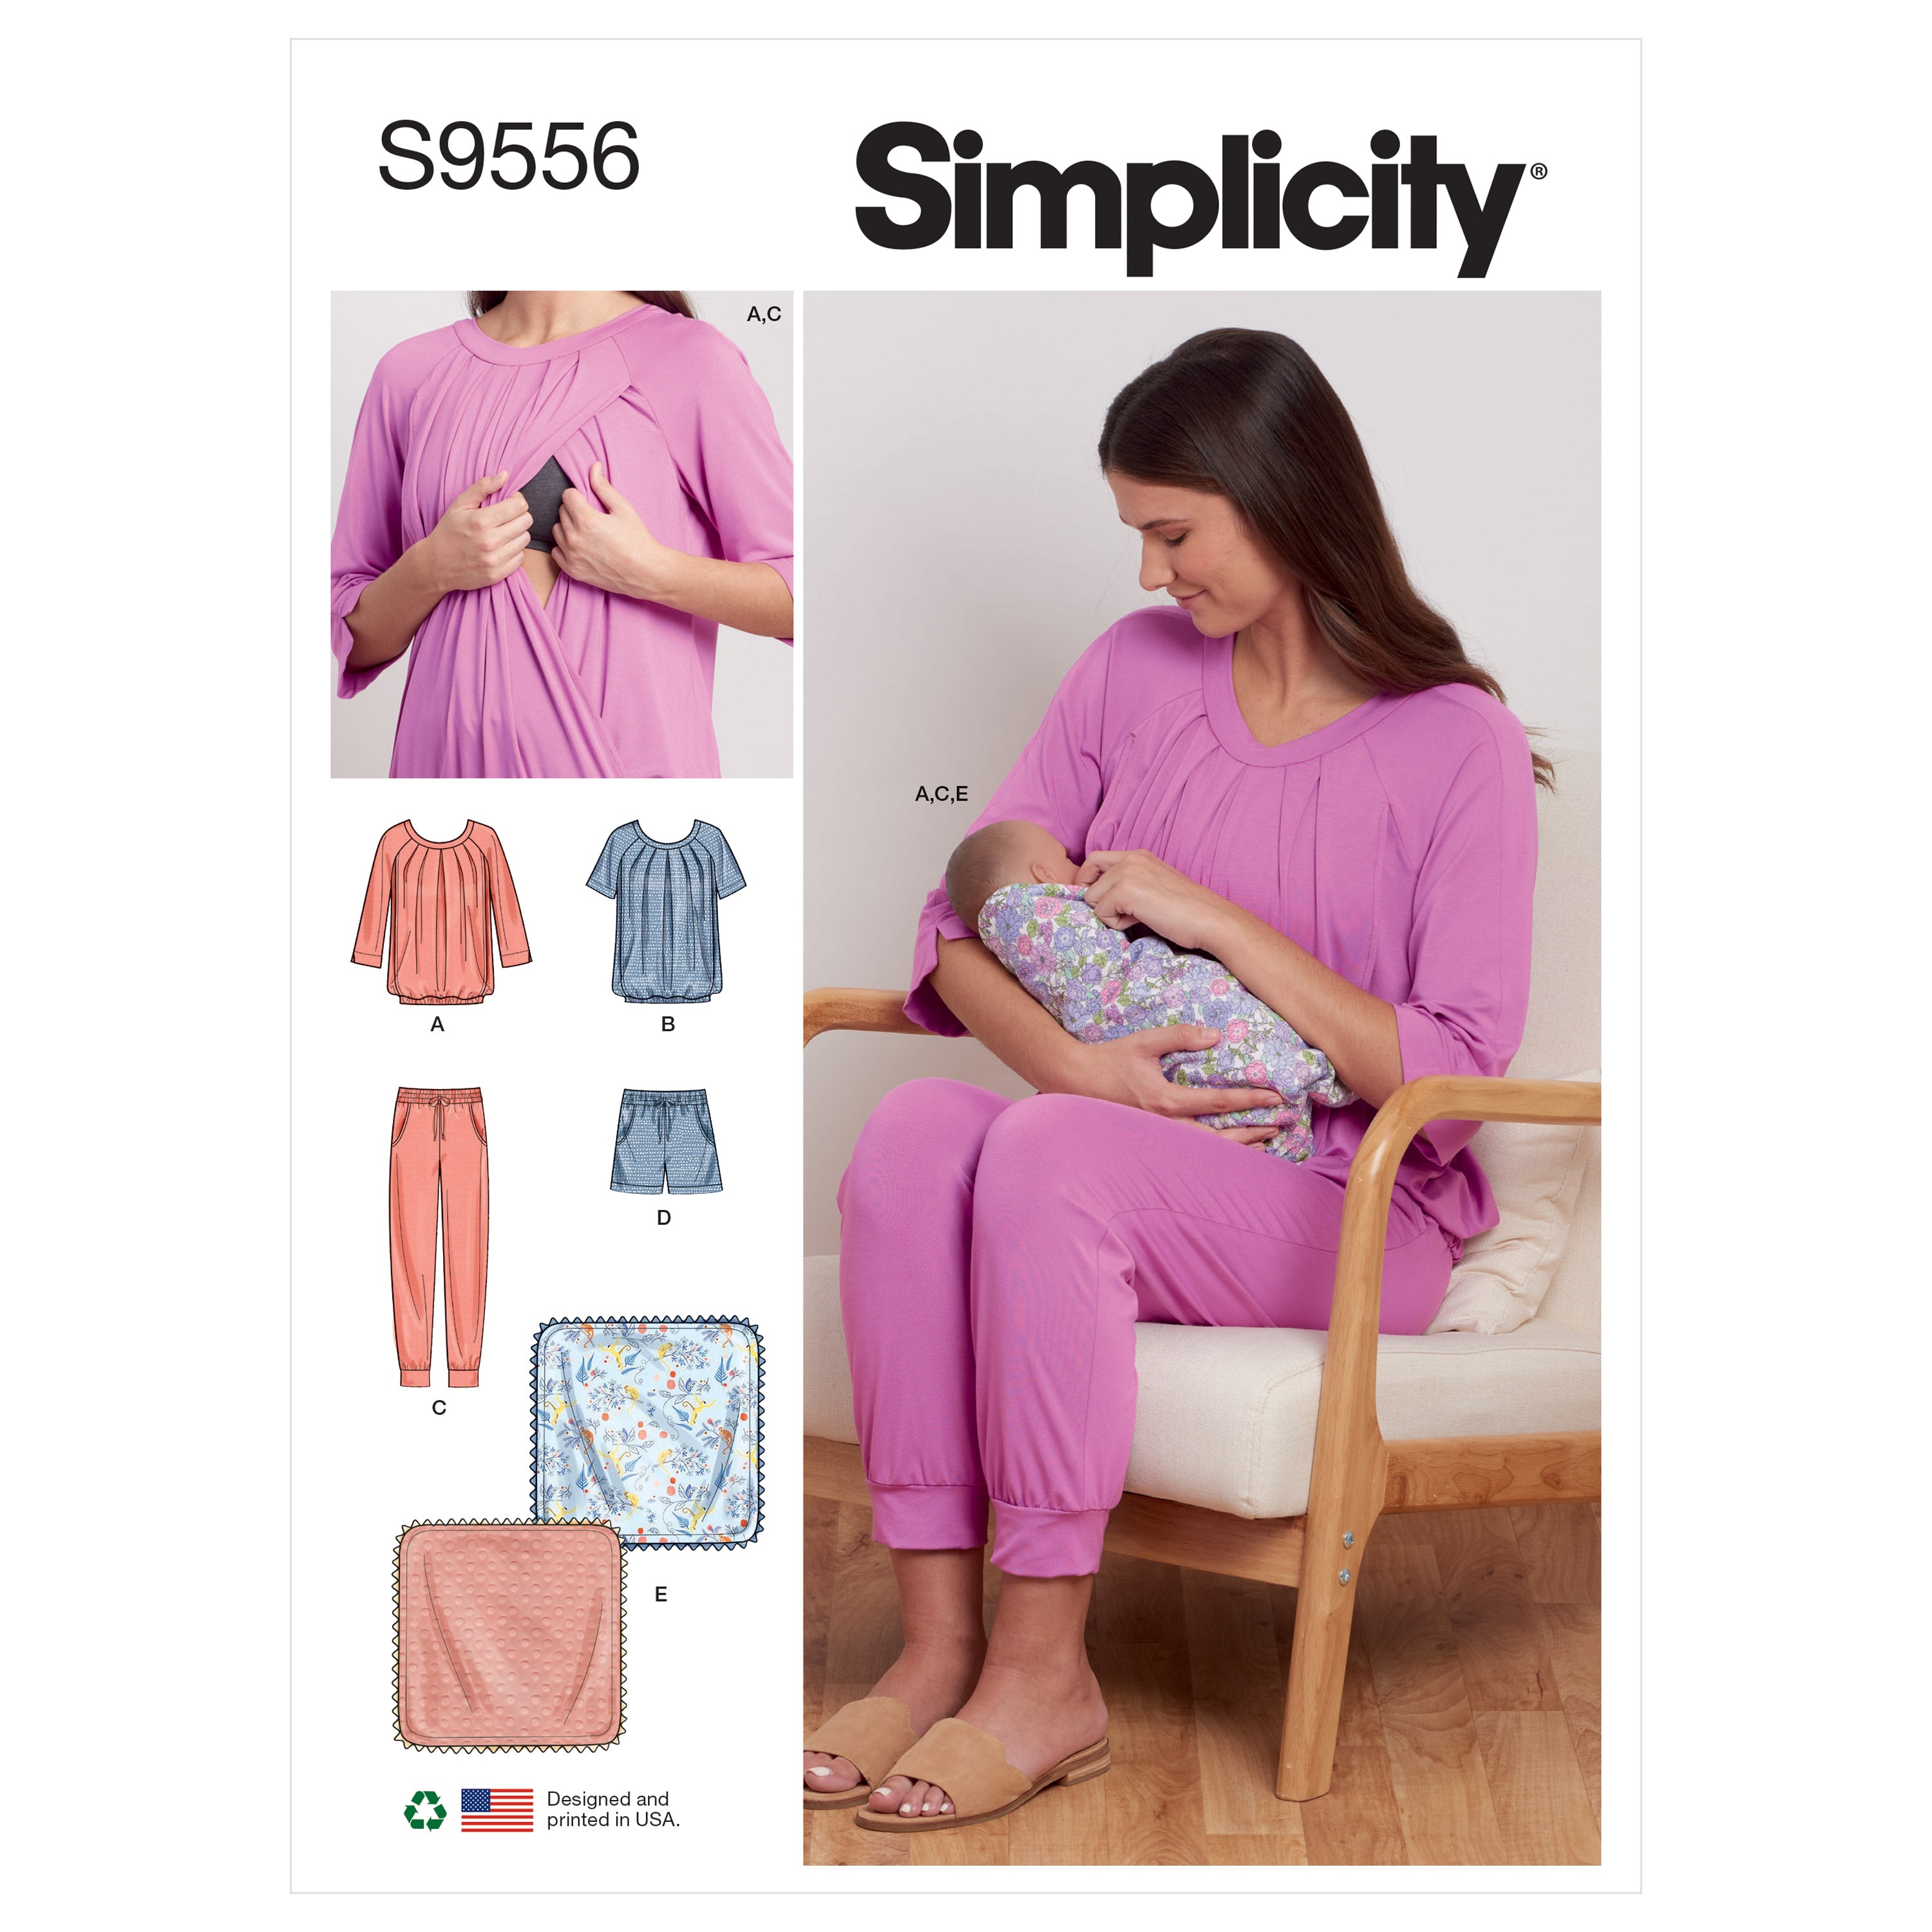 Simplicity 9556 Misses' Nursing Tops, Pants, Shorts and Blanket pattern from Jaycotts Sewing Supplies